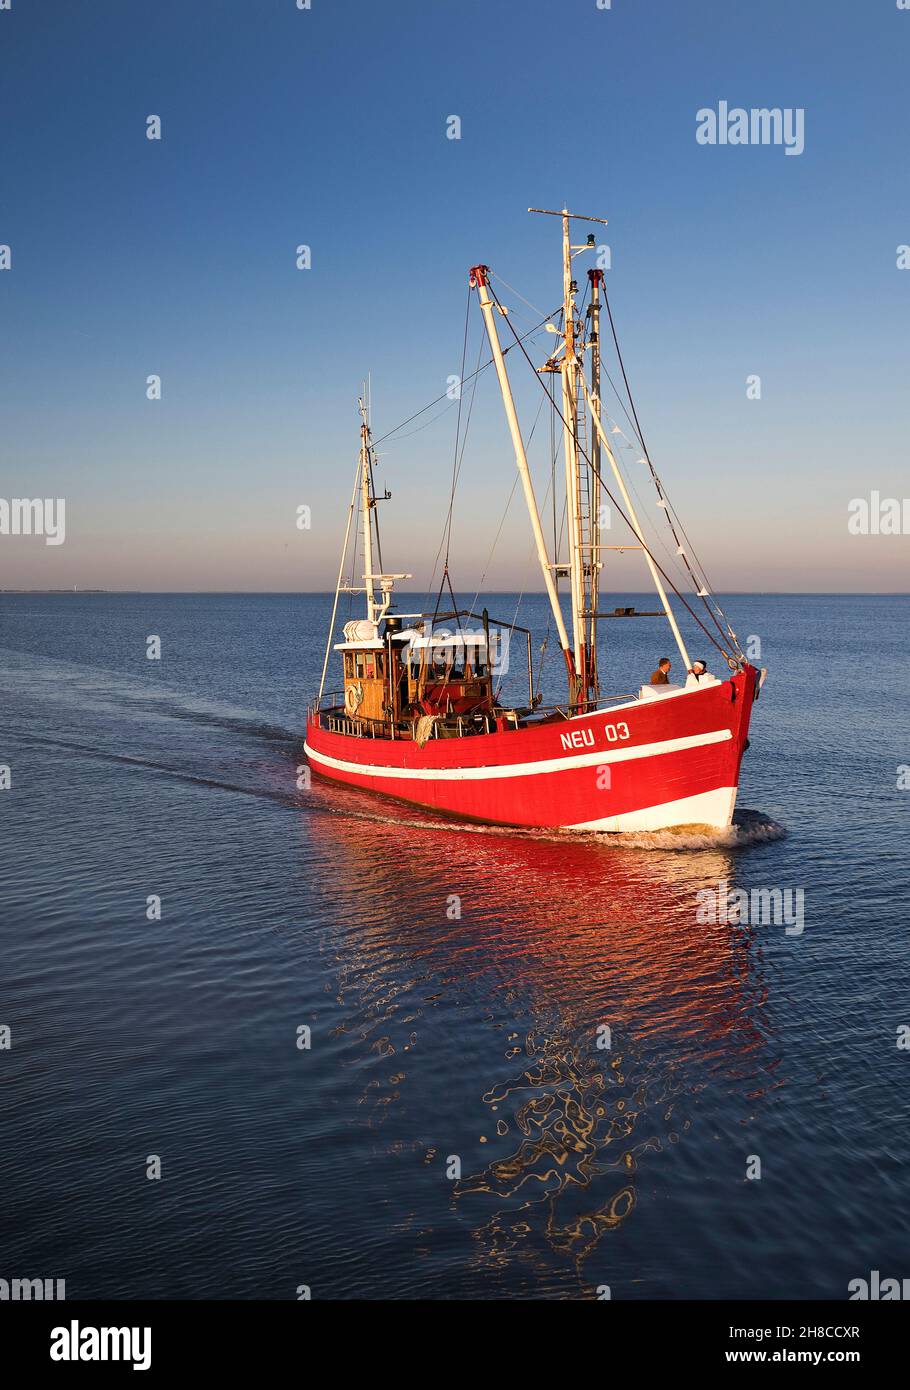 shrimper boat in the North Sea, Germany, Lower Saxony, Lower Saxony Wadden Sea National Park Stock Photo